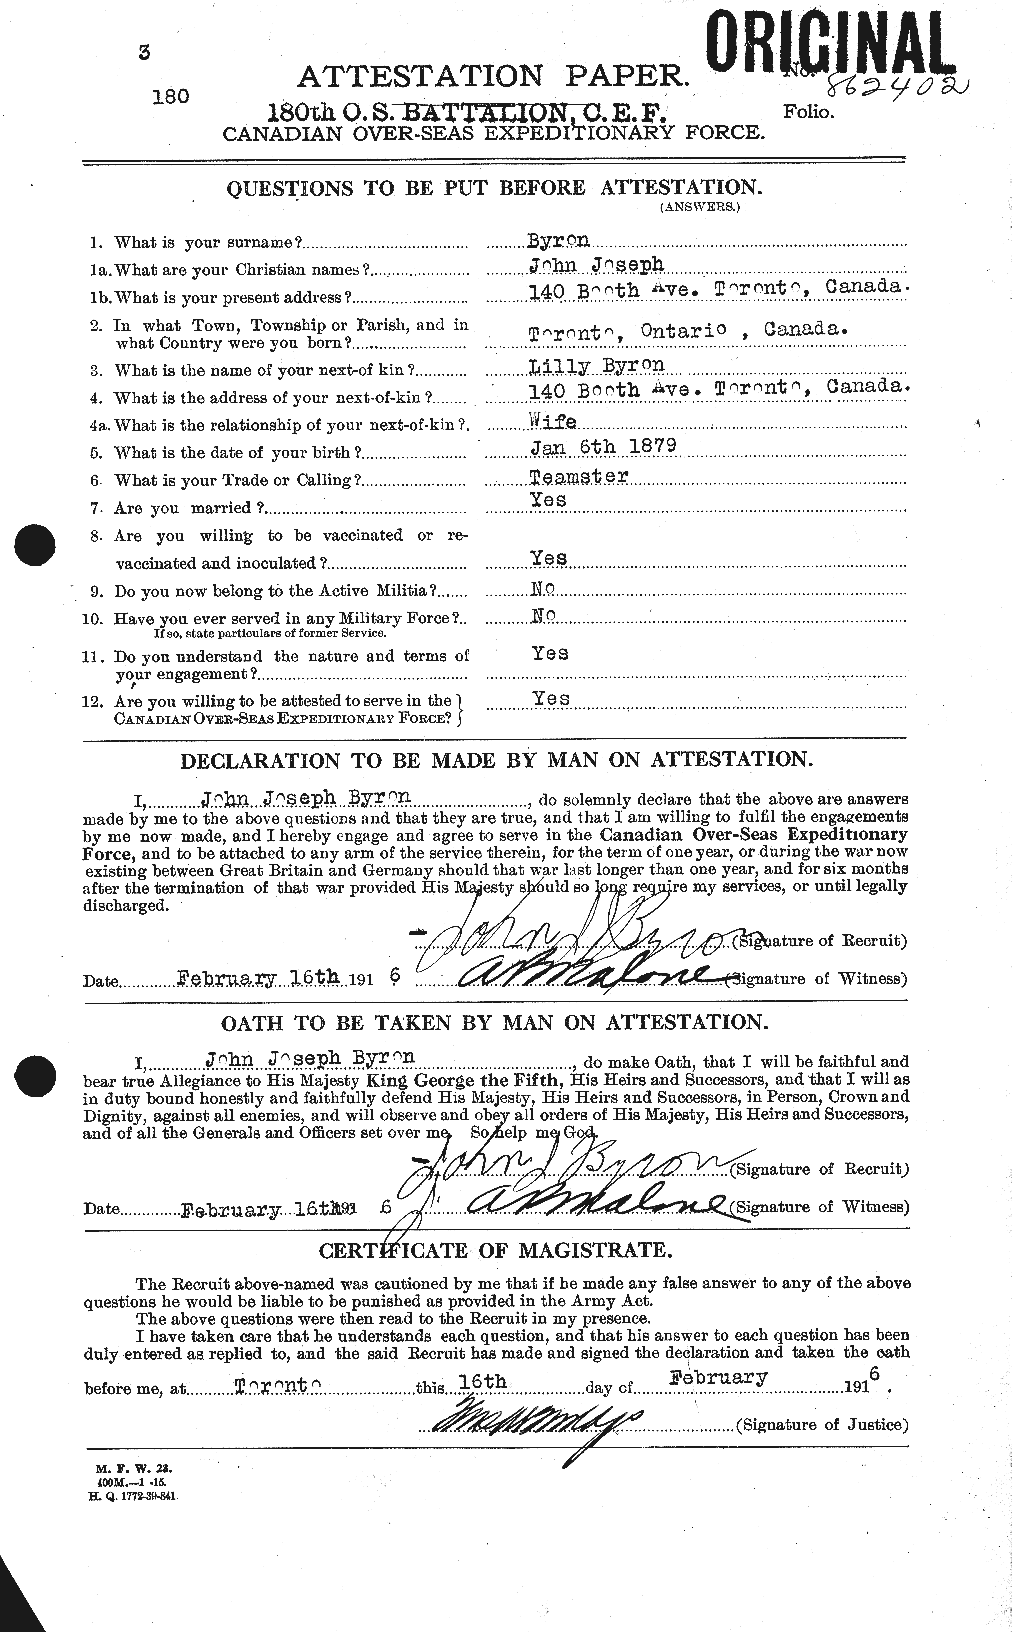 Personnel Records of the First World War - CEF 277249a